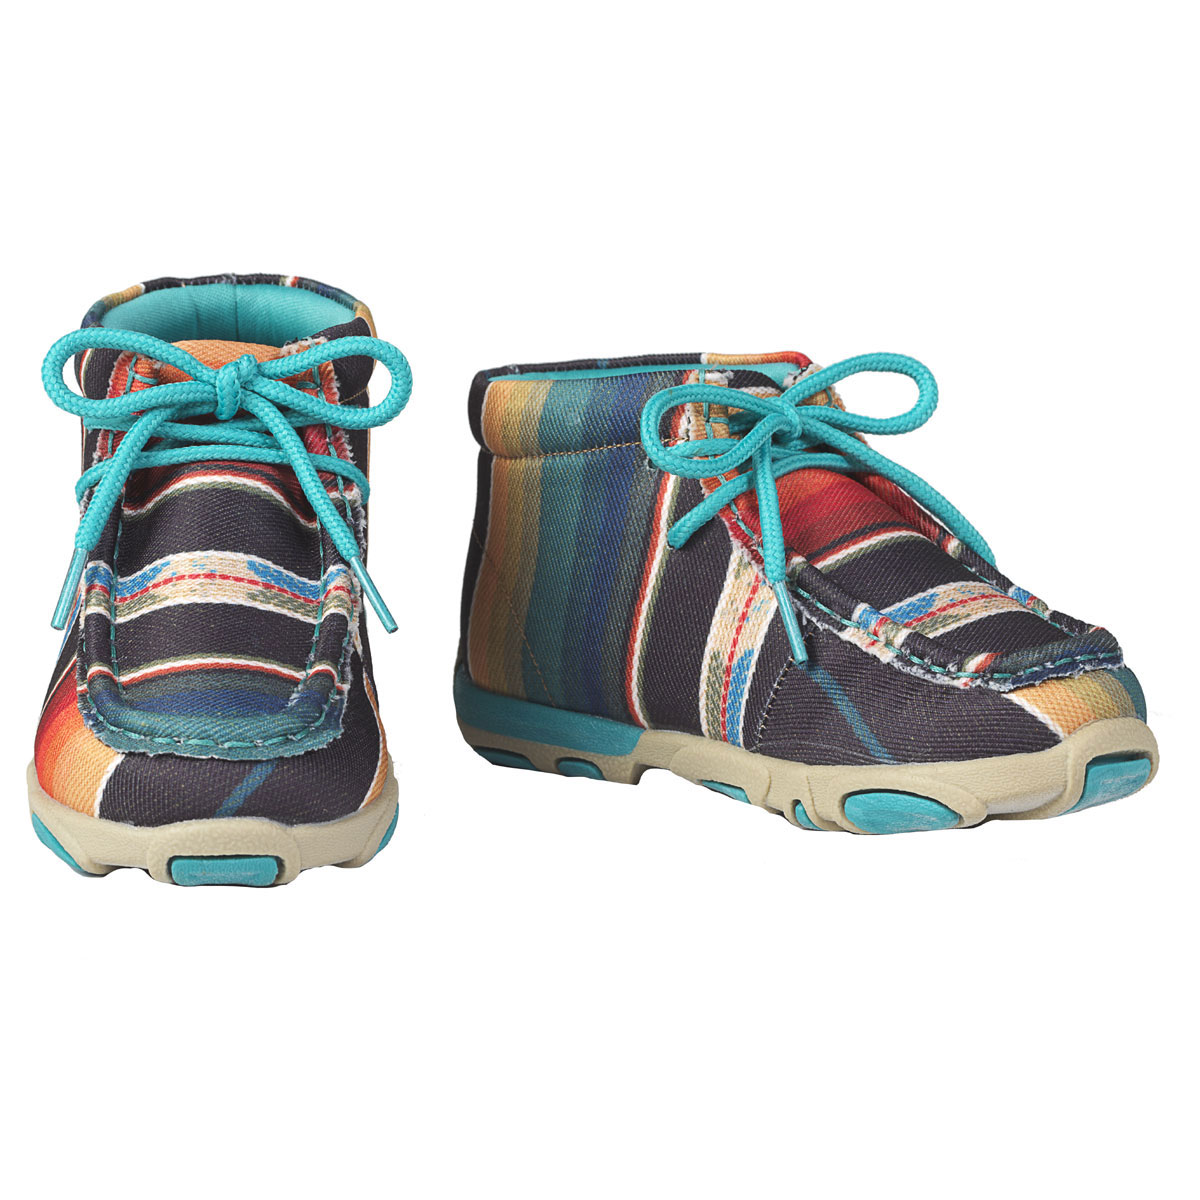 Twister Children's Elise Casual Shoes - Turquoise